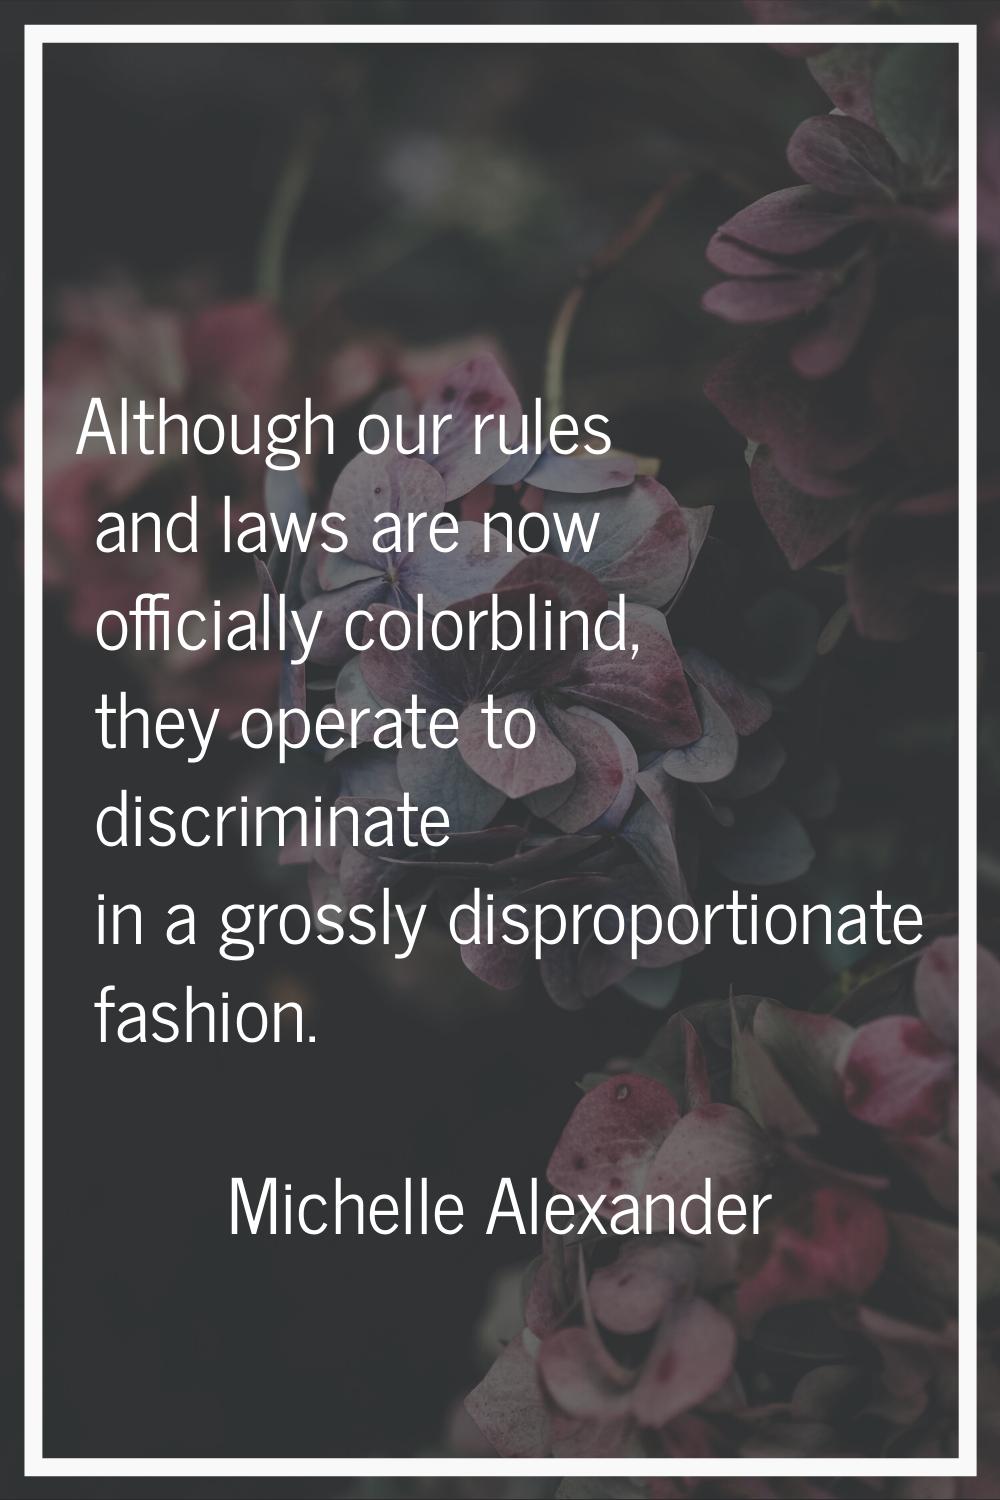 Although our rules and laws are now officially colorblind, they operate to discriminate in a grossl